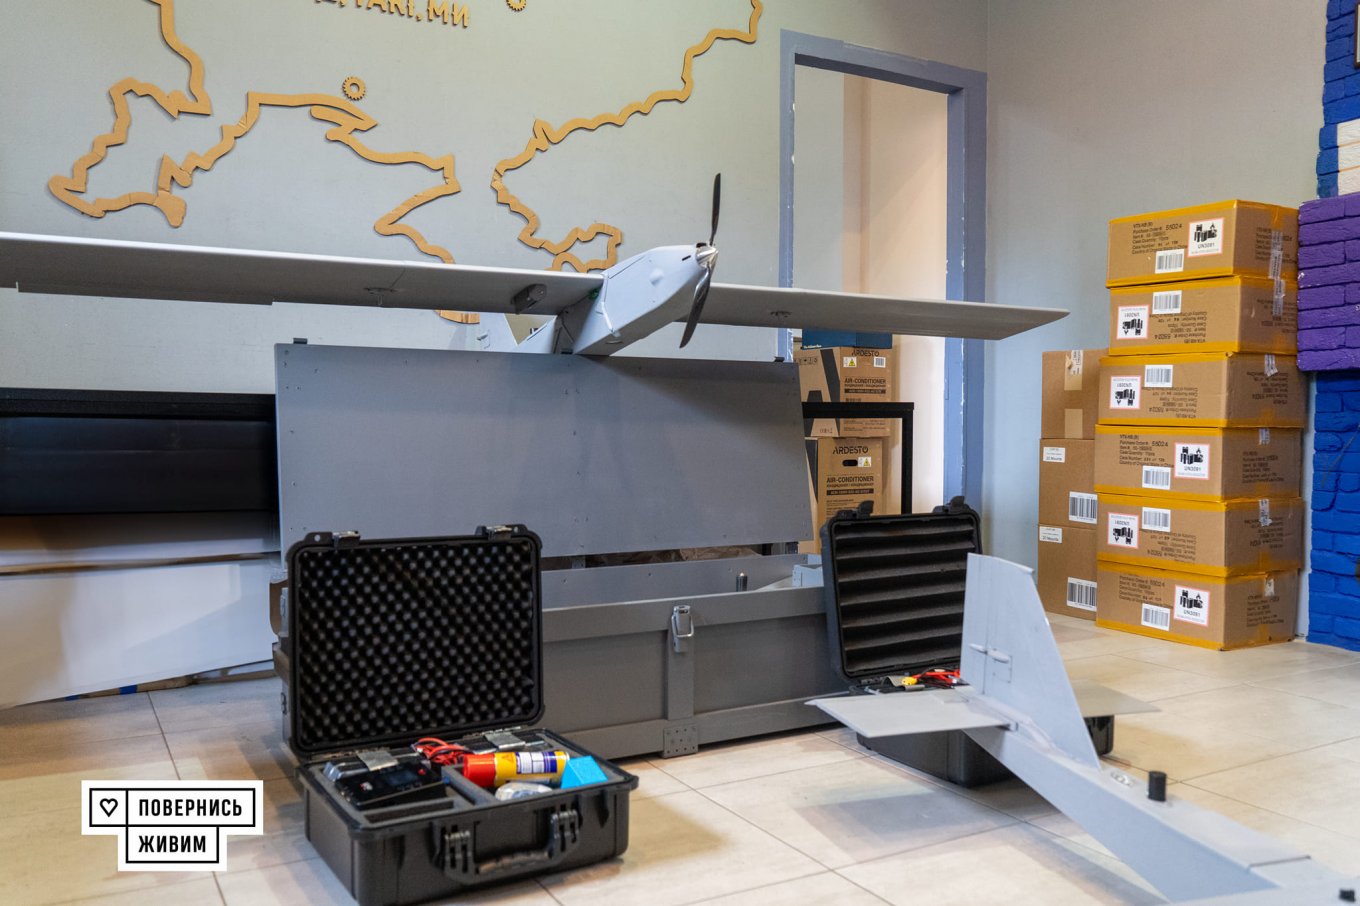 Sych UAS kit consists of two aerial vehicles, a catapult, and a ground-based control station